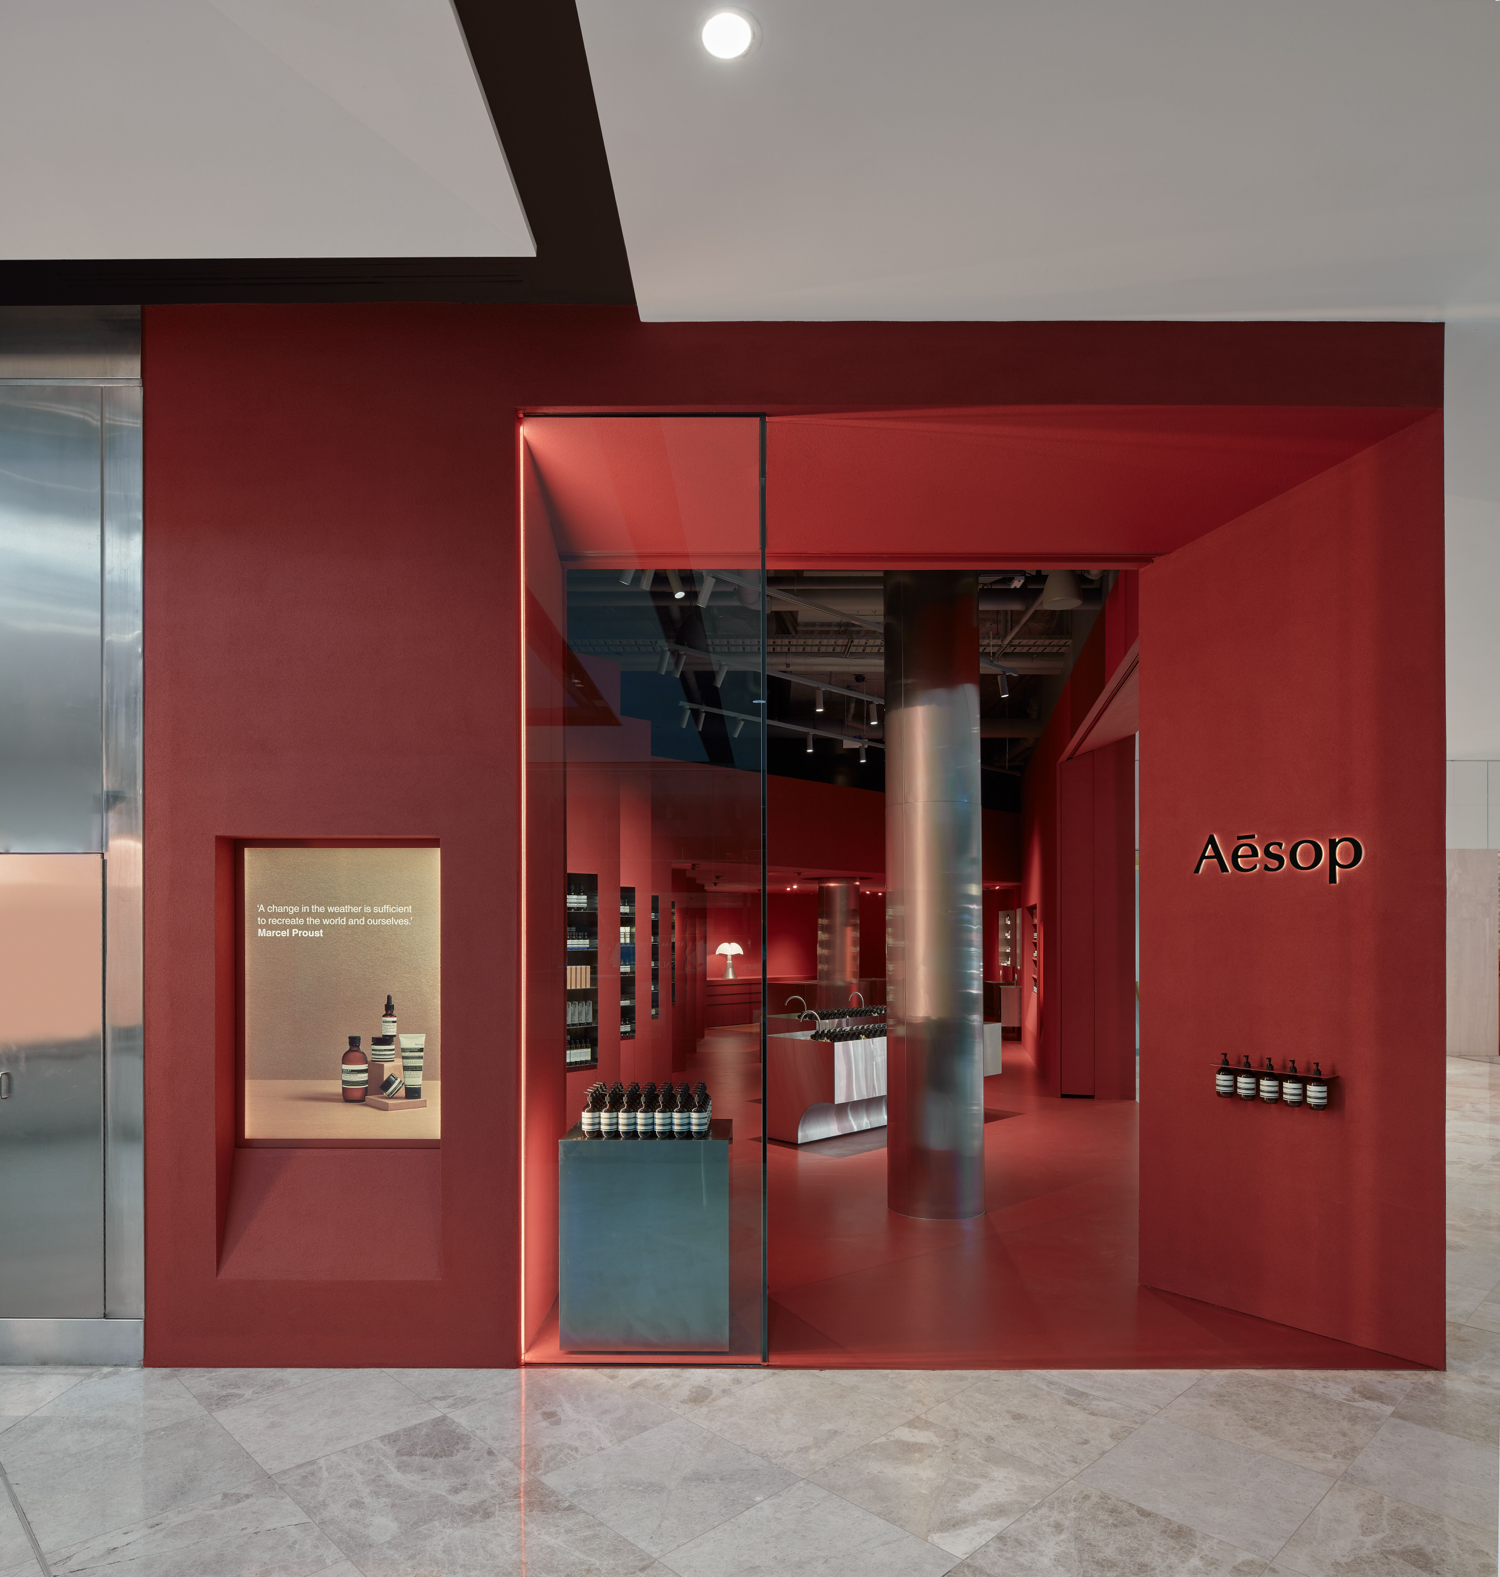 Louis Vuitton Opens Flagship Brisbane Store With Paris-Inspired